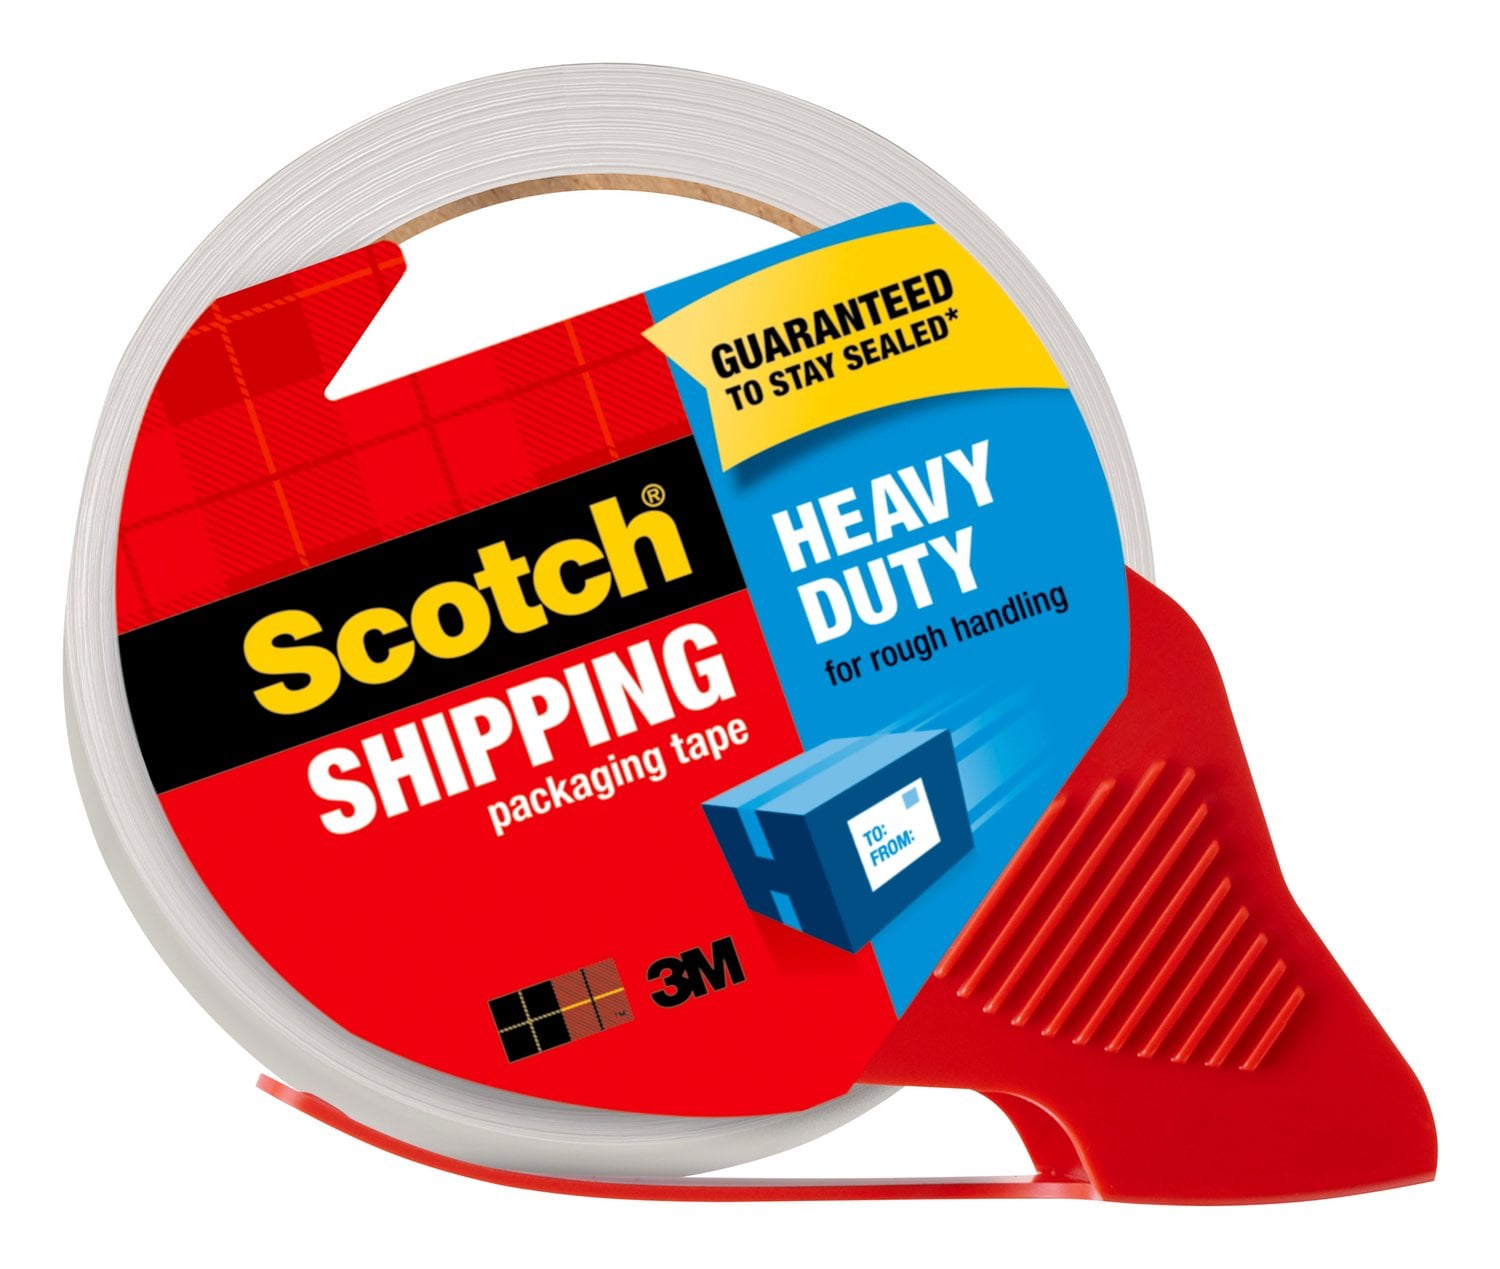 7100232724 - Scotch Heavy Duty Shipping Packaging Tape 3850-RD-12WC, 1.88 in x 54.6 yd (48 mm x 50 m), Refillable Dispenser